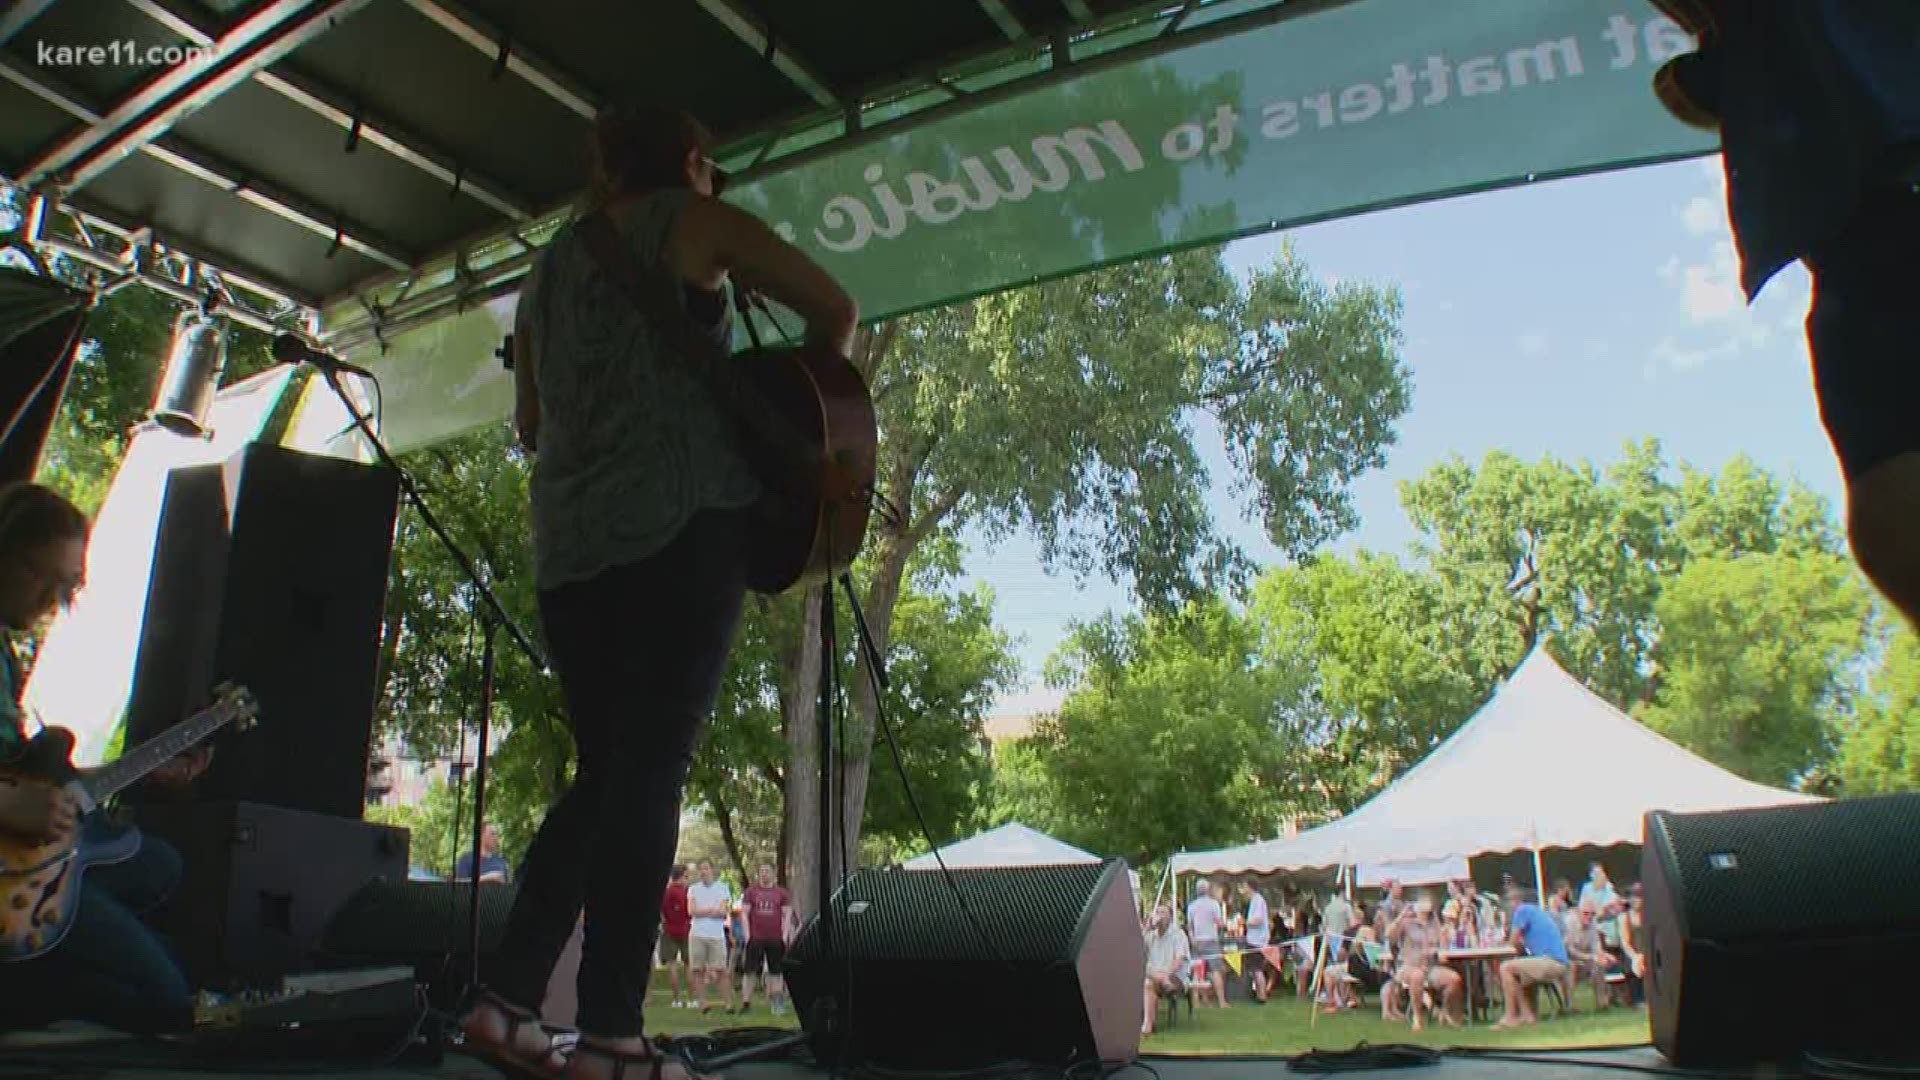 KARE 11 had some representation at the Stone Arch Bridge Fest, with our digital producer Emily Haavik and her band the 35s!